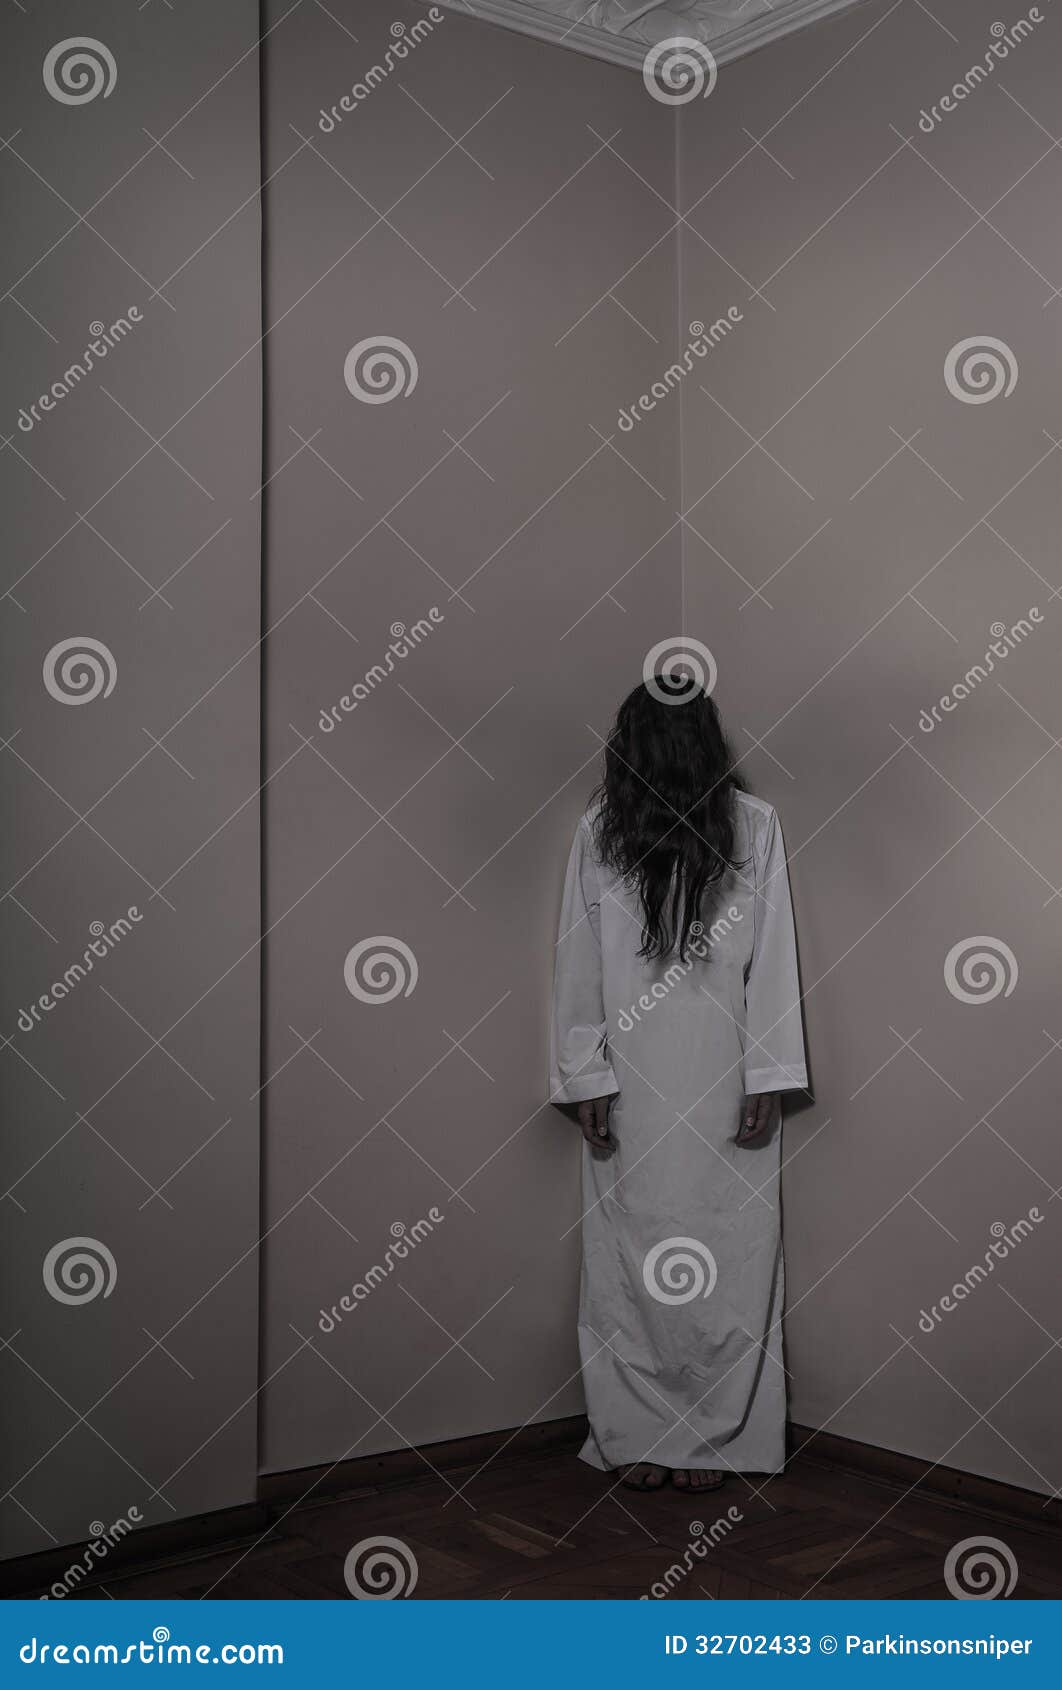 Angel Of Death Horror Stock Image Image Of Freaky Wings 32702433